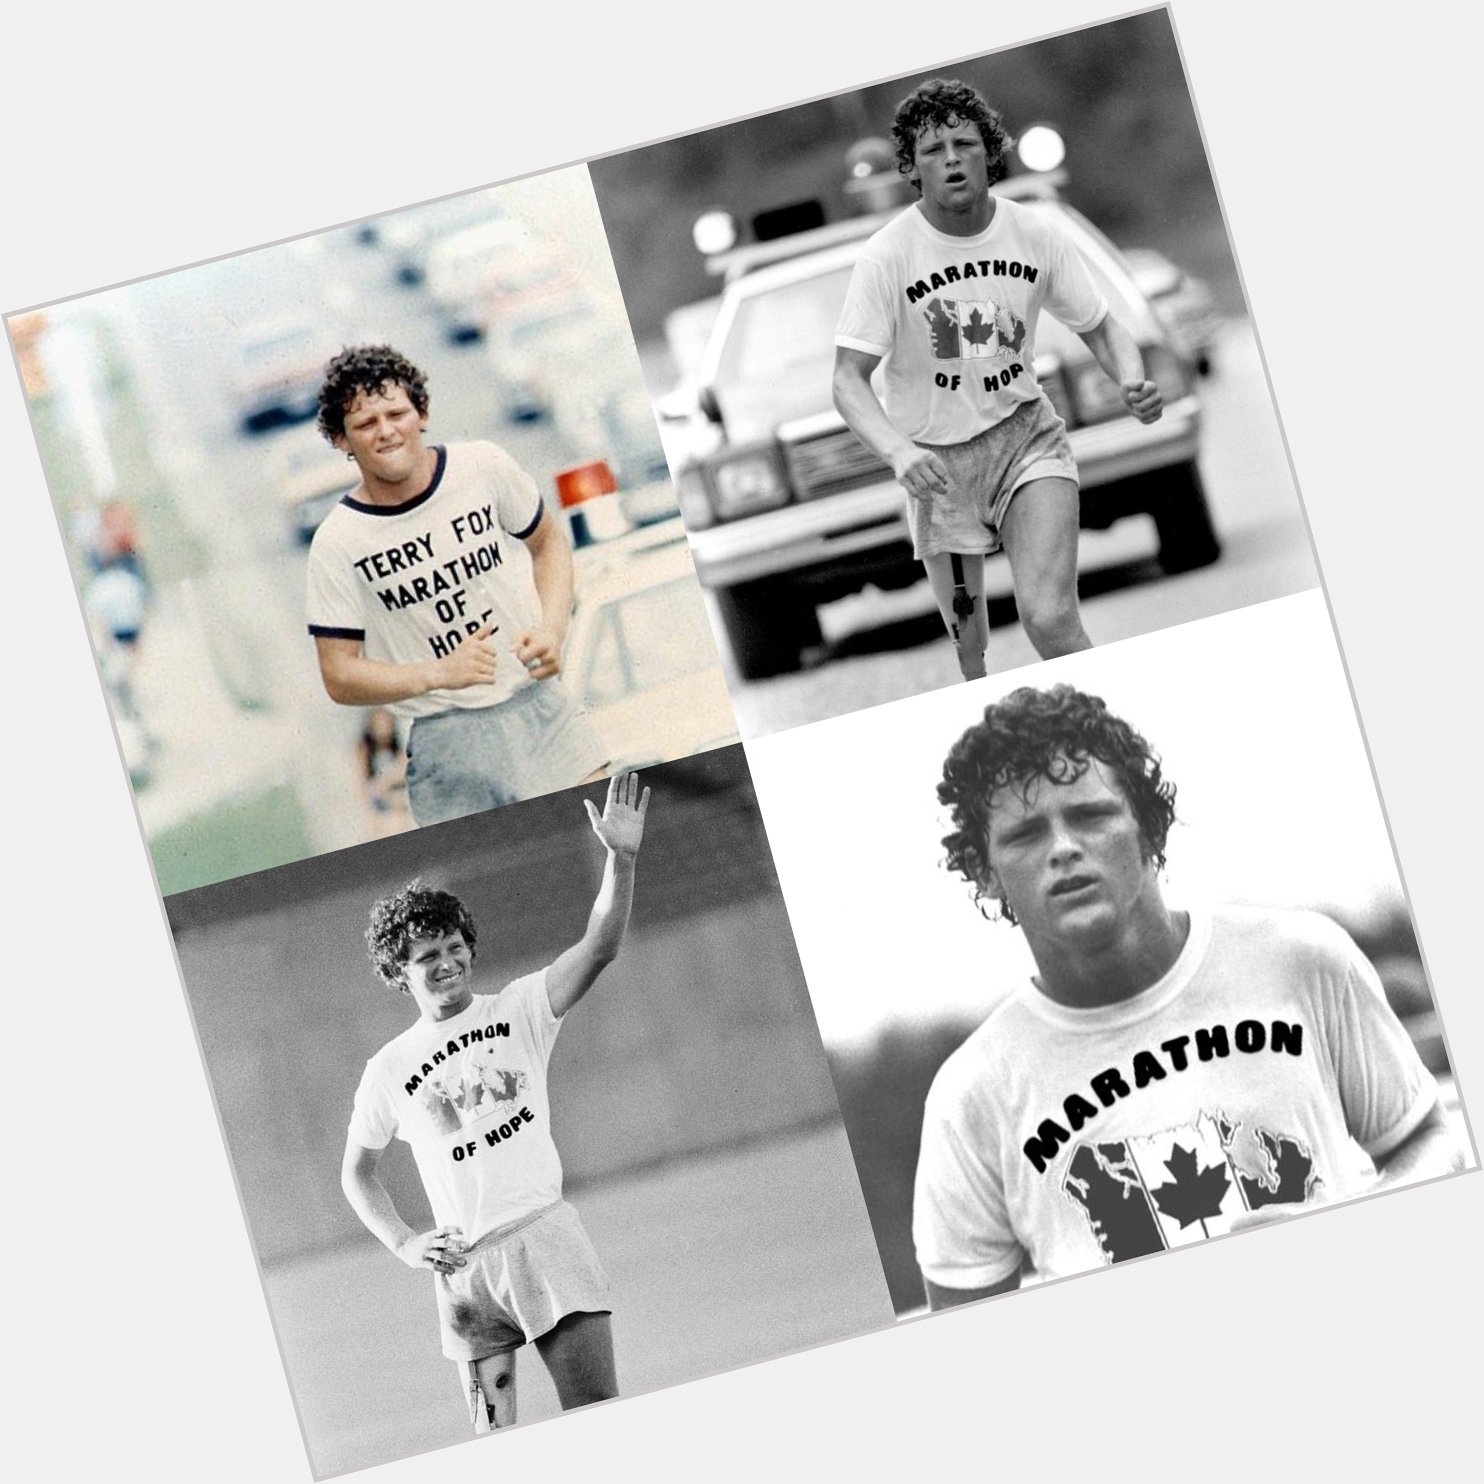 Happy 60 birthday to Terry Fox up in heaven. May he Rest In Peace.  